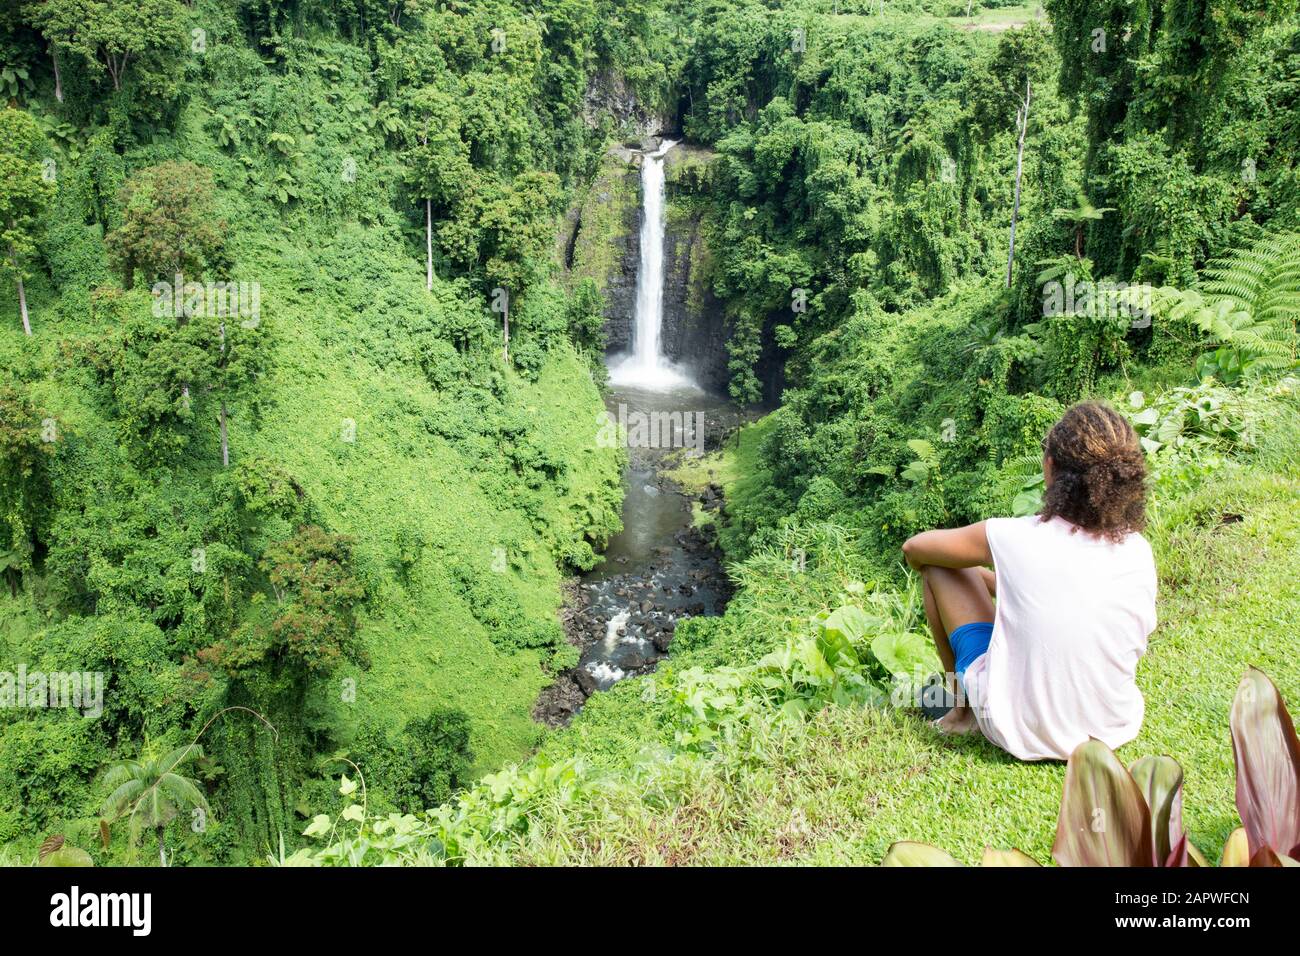 Male tourist with curly hair, looking at exotic Fuipsia waterfall Stock Photo